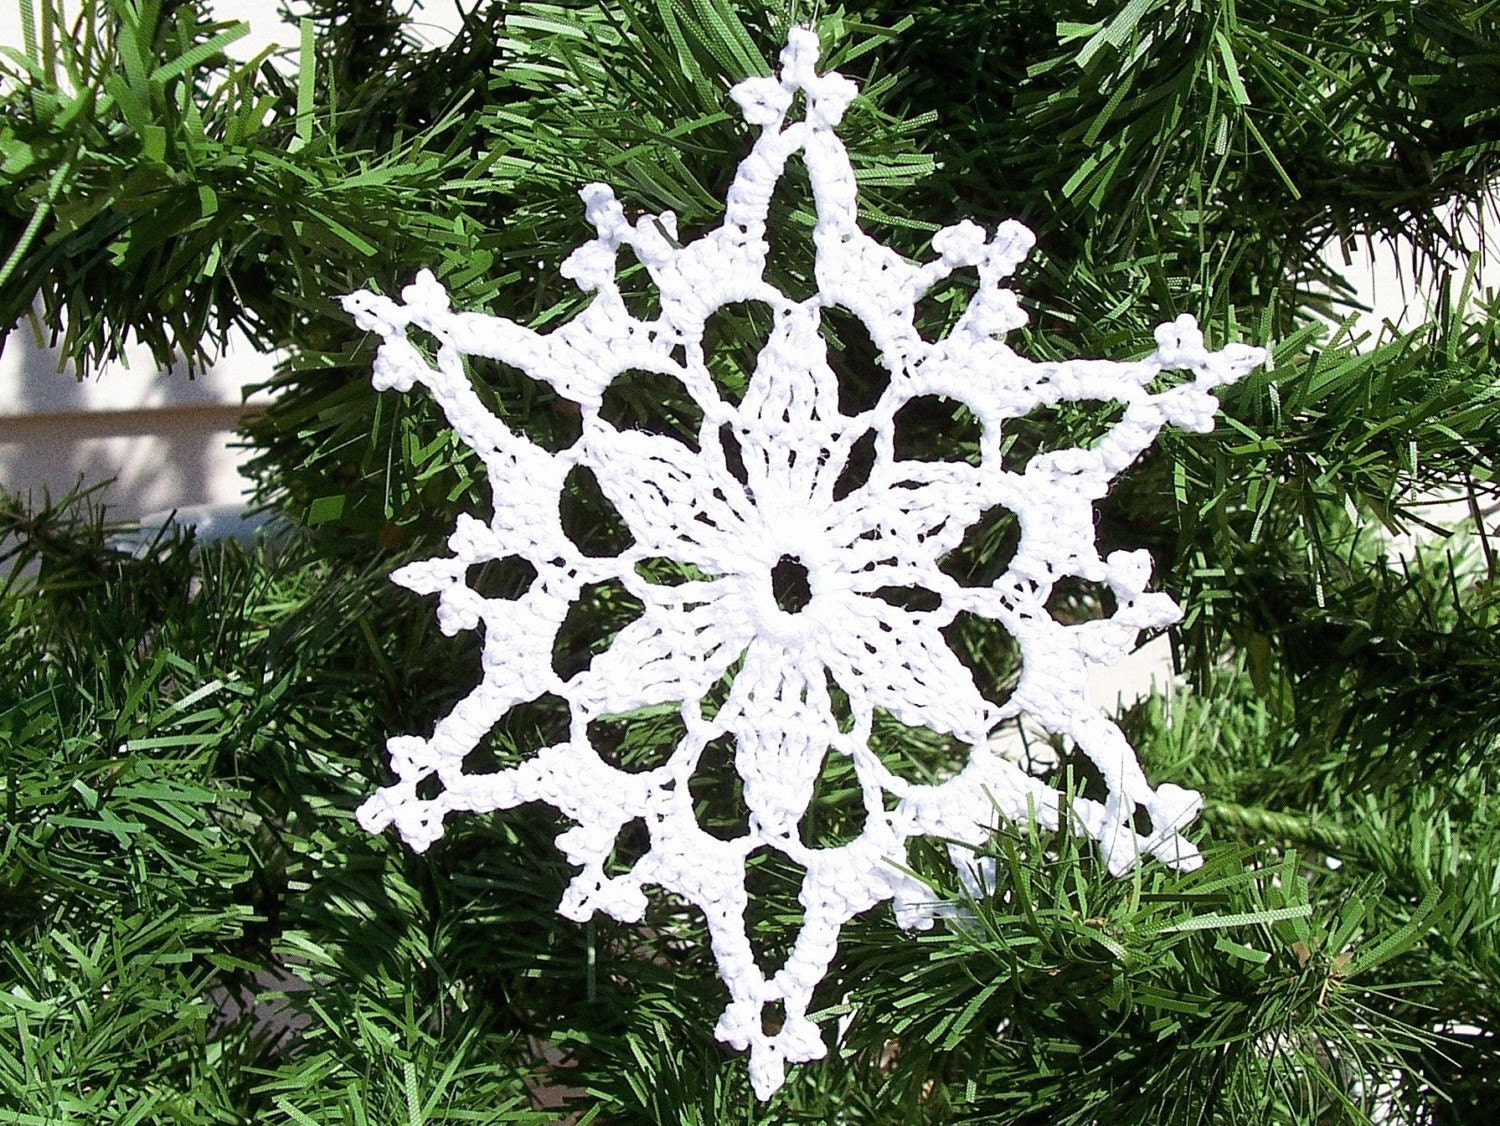 Free Crochet Patterns for Snowflakes - Yahoo! Voices - voices